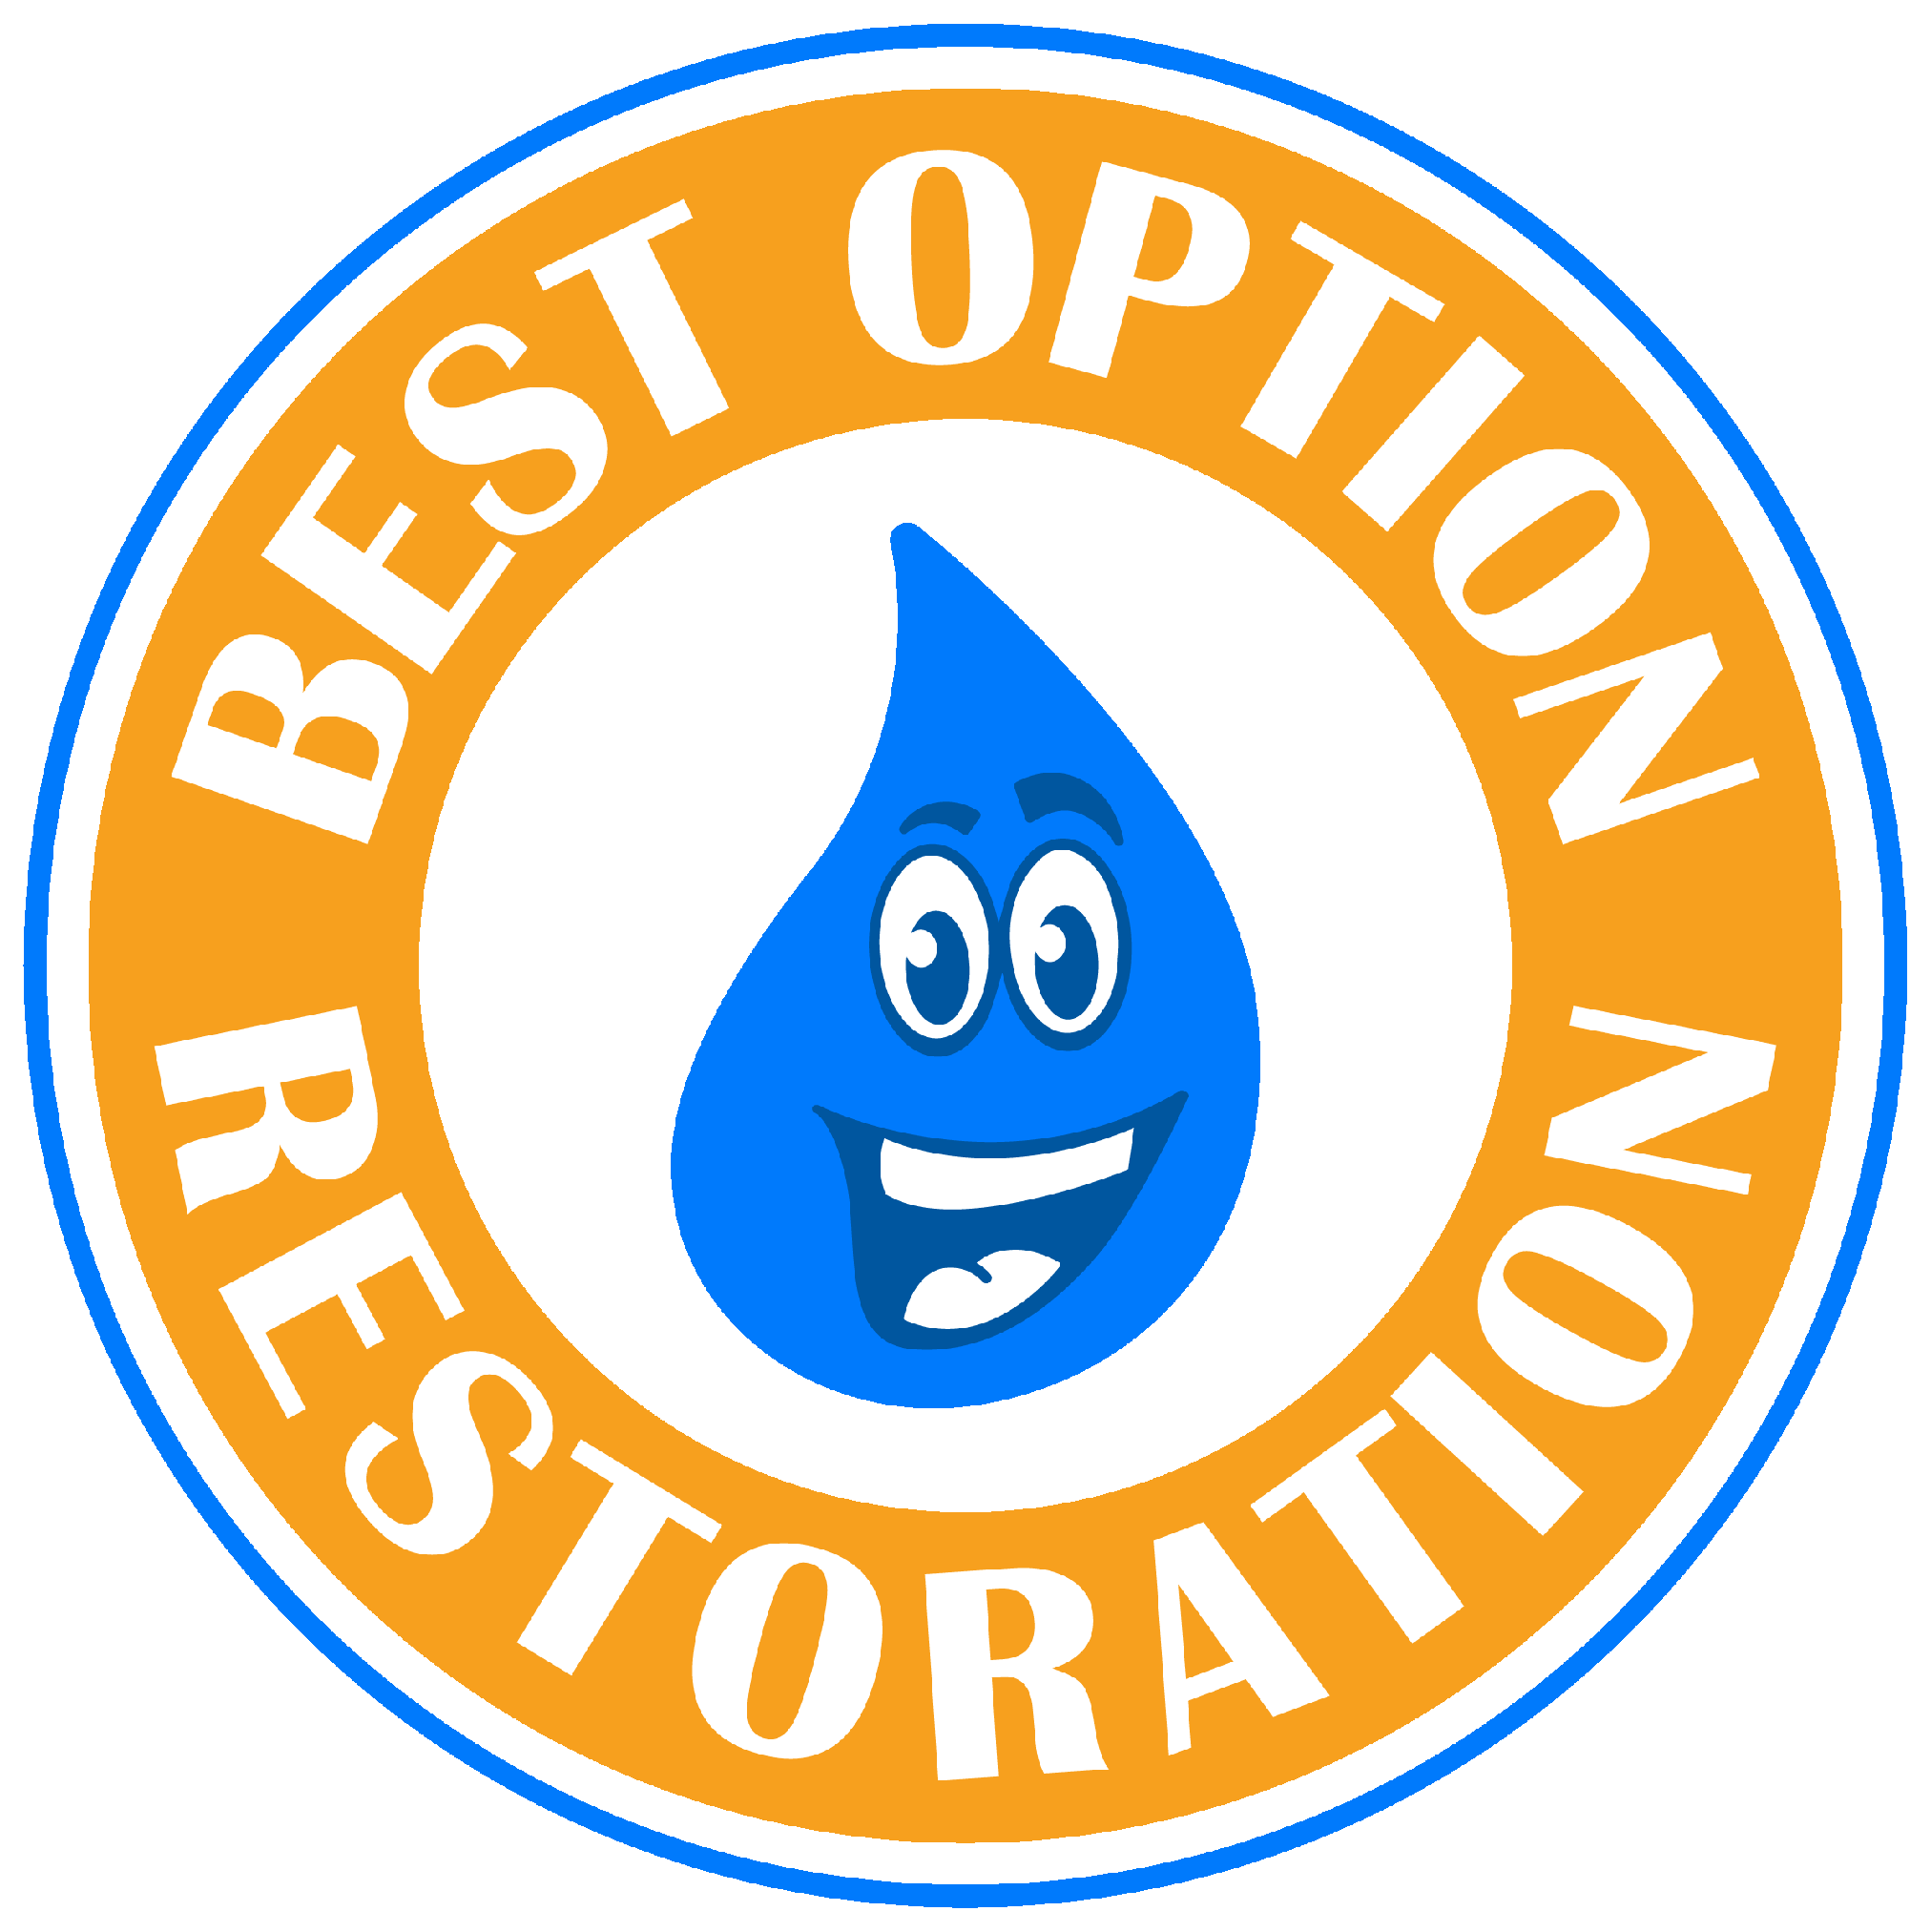 Disaster Restoration Company, Water Damage Repair Service in Raleigh, NC